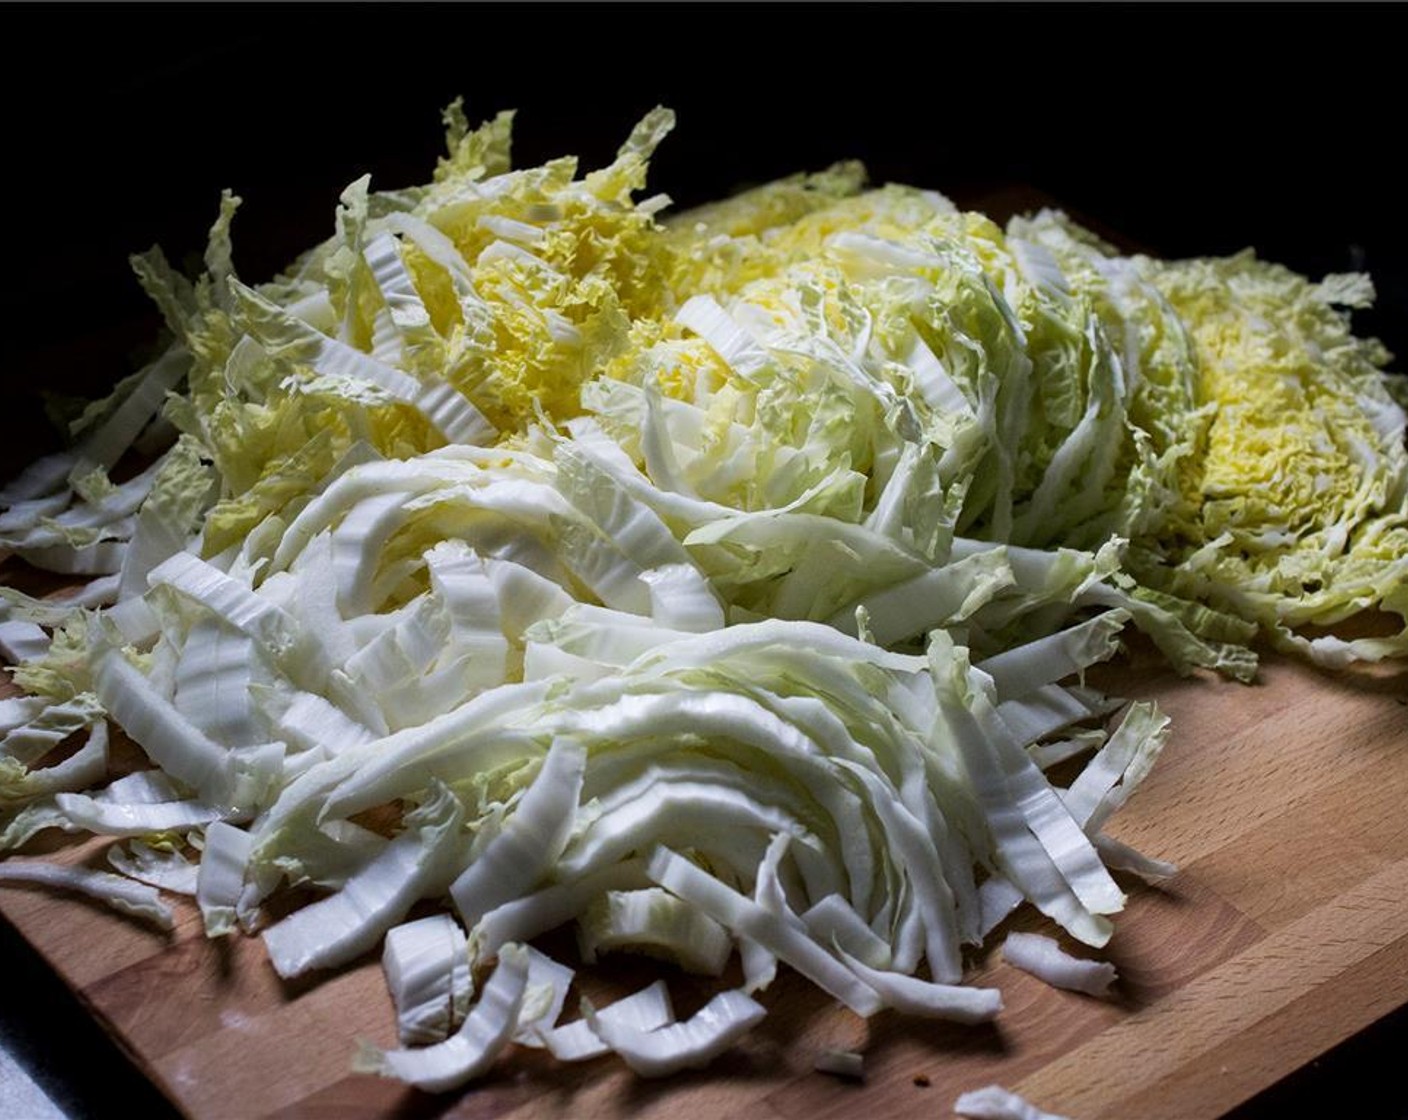 step 1 For the Kimchi: Place the Napa Cabbage (5 cups) in a large bowl. Add Water (10 cups) and Kosher Salt (1/4 cup) and stir to combine. Let sit for 10 minutes.